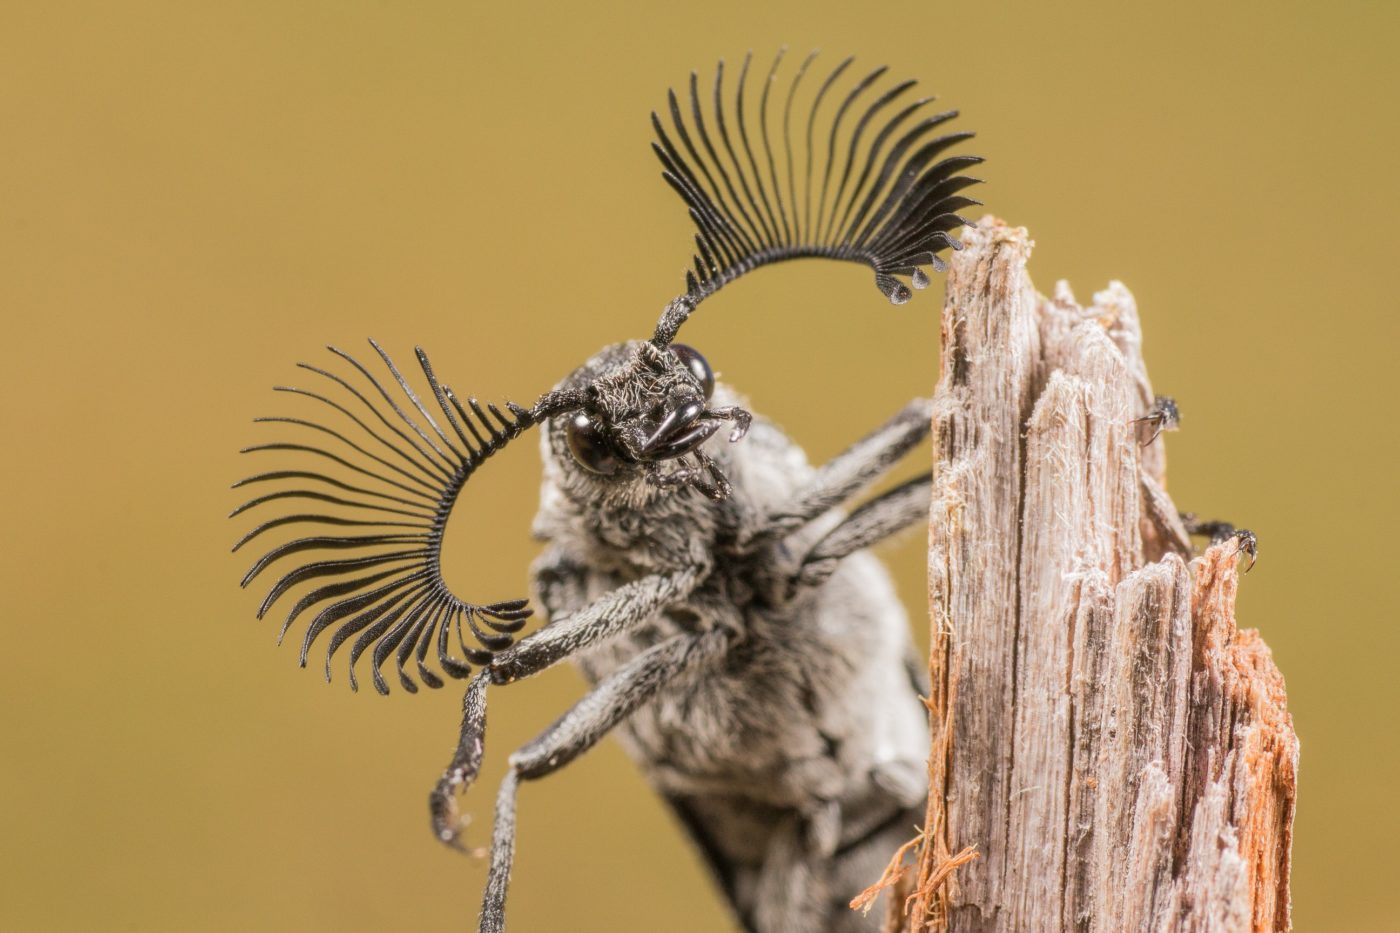 Portrait of a male feather-horned beetle, Rhipicera sp., seen in mid-April 2014 at Little Carine Swamp